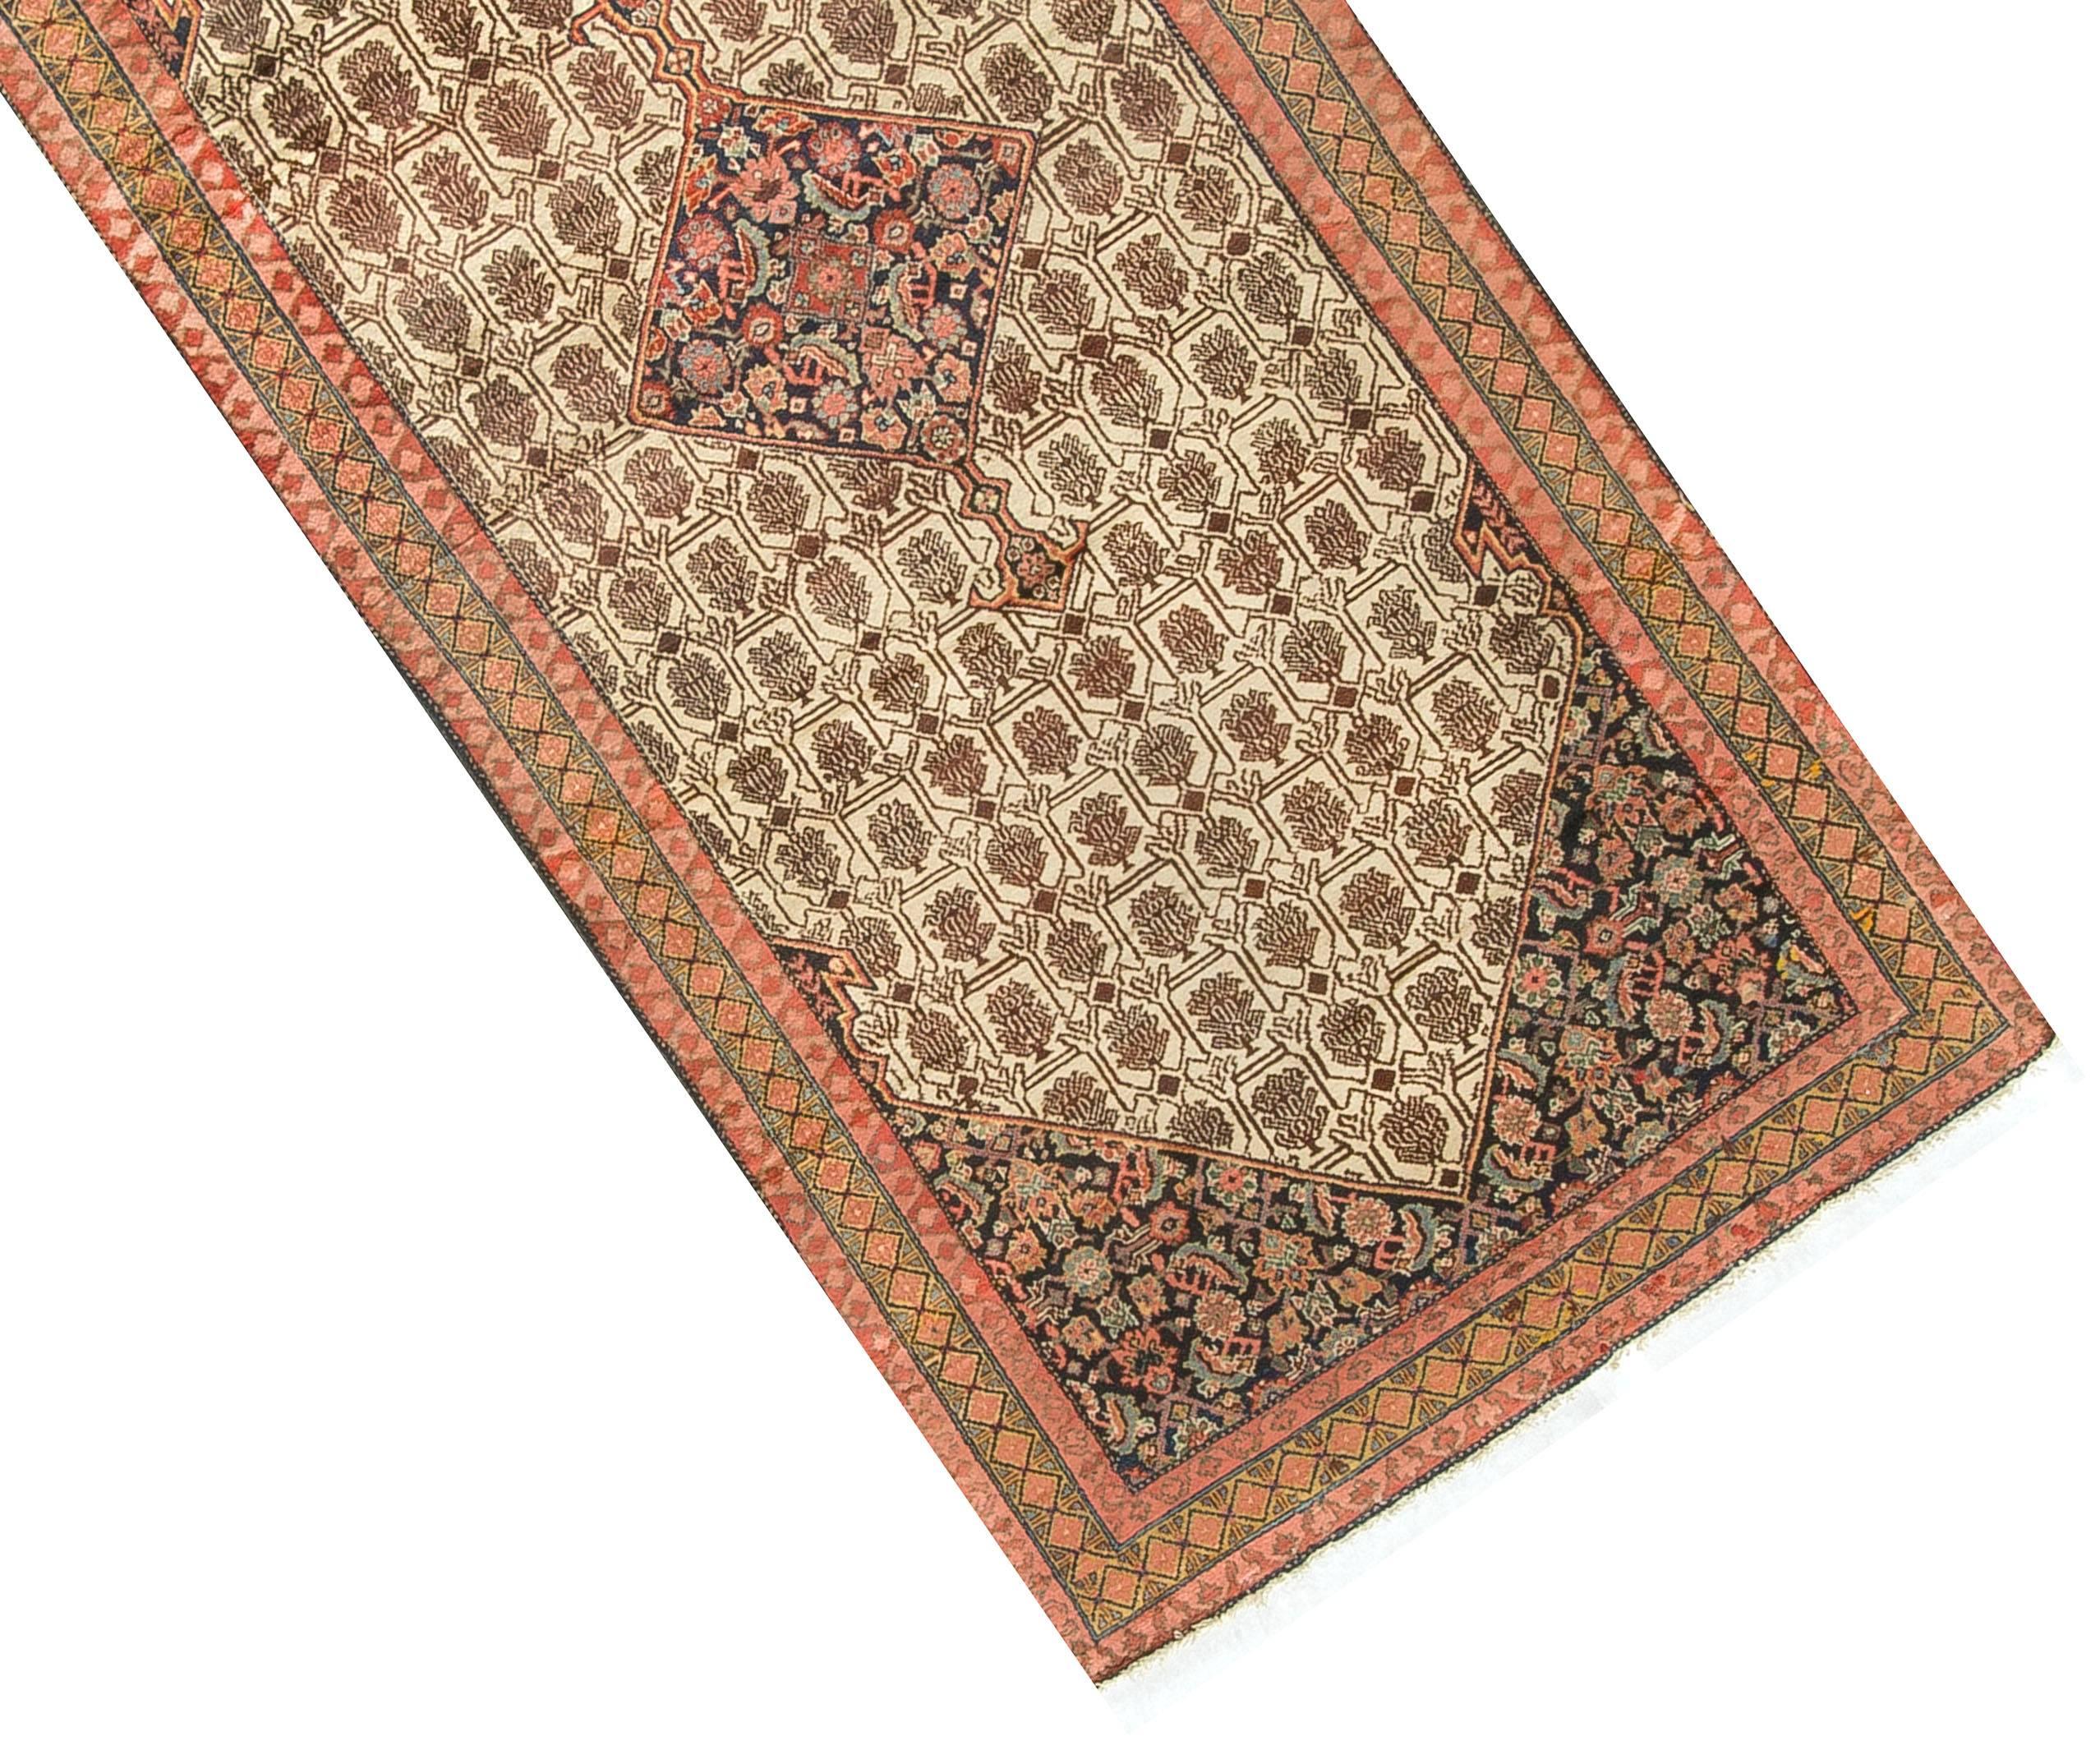 Antique Persian Serab Camel Hair Rug Runner circa 1900. A fine camelhair wool Serab rug, the central field in earth tones enclosing a central floral design medallion which is repeated in the four corner spandrels the wool used is quite often from